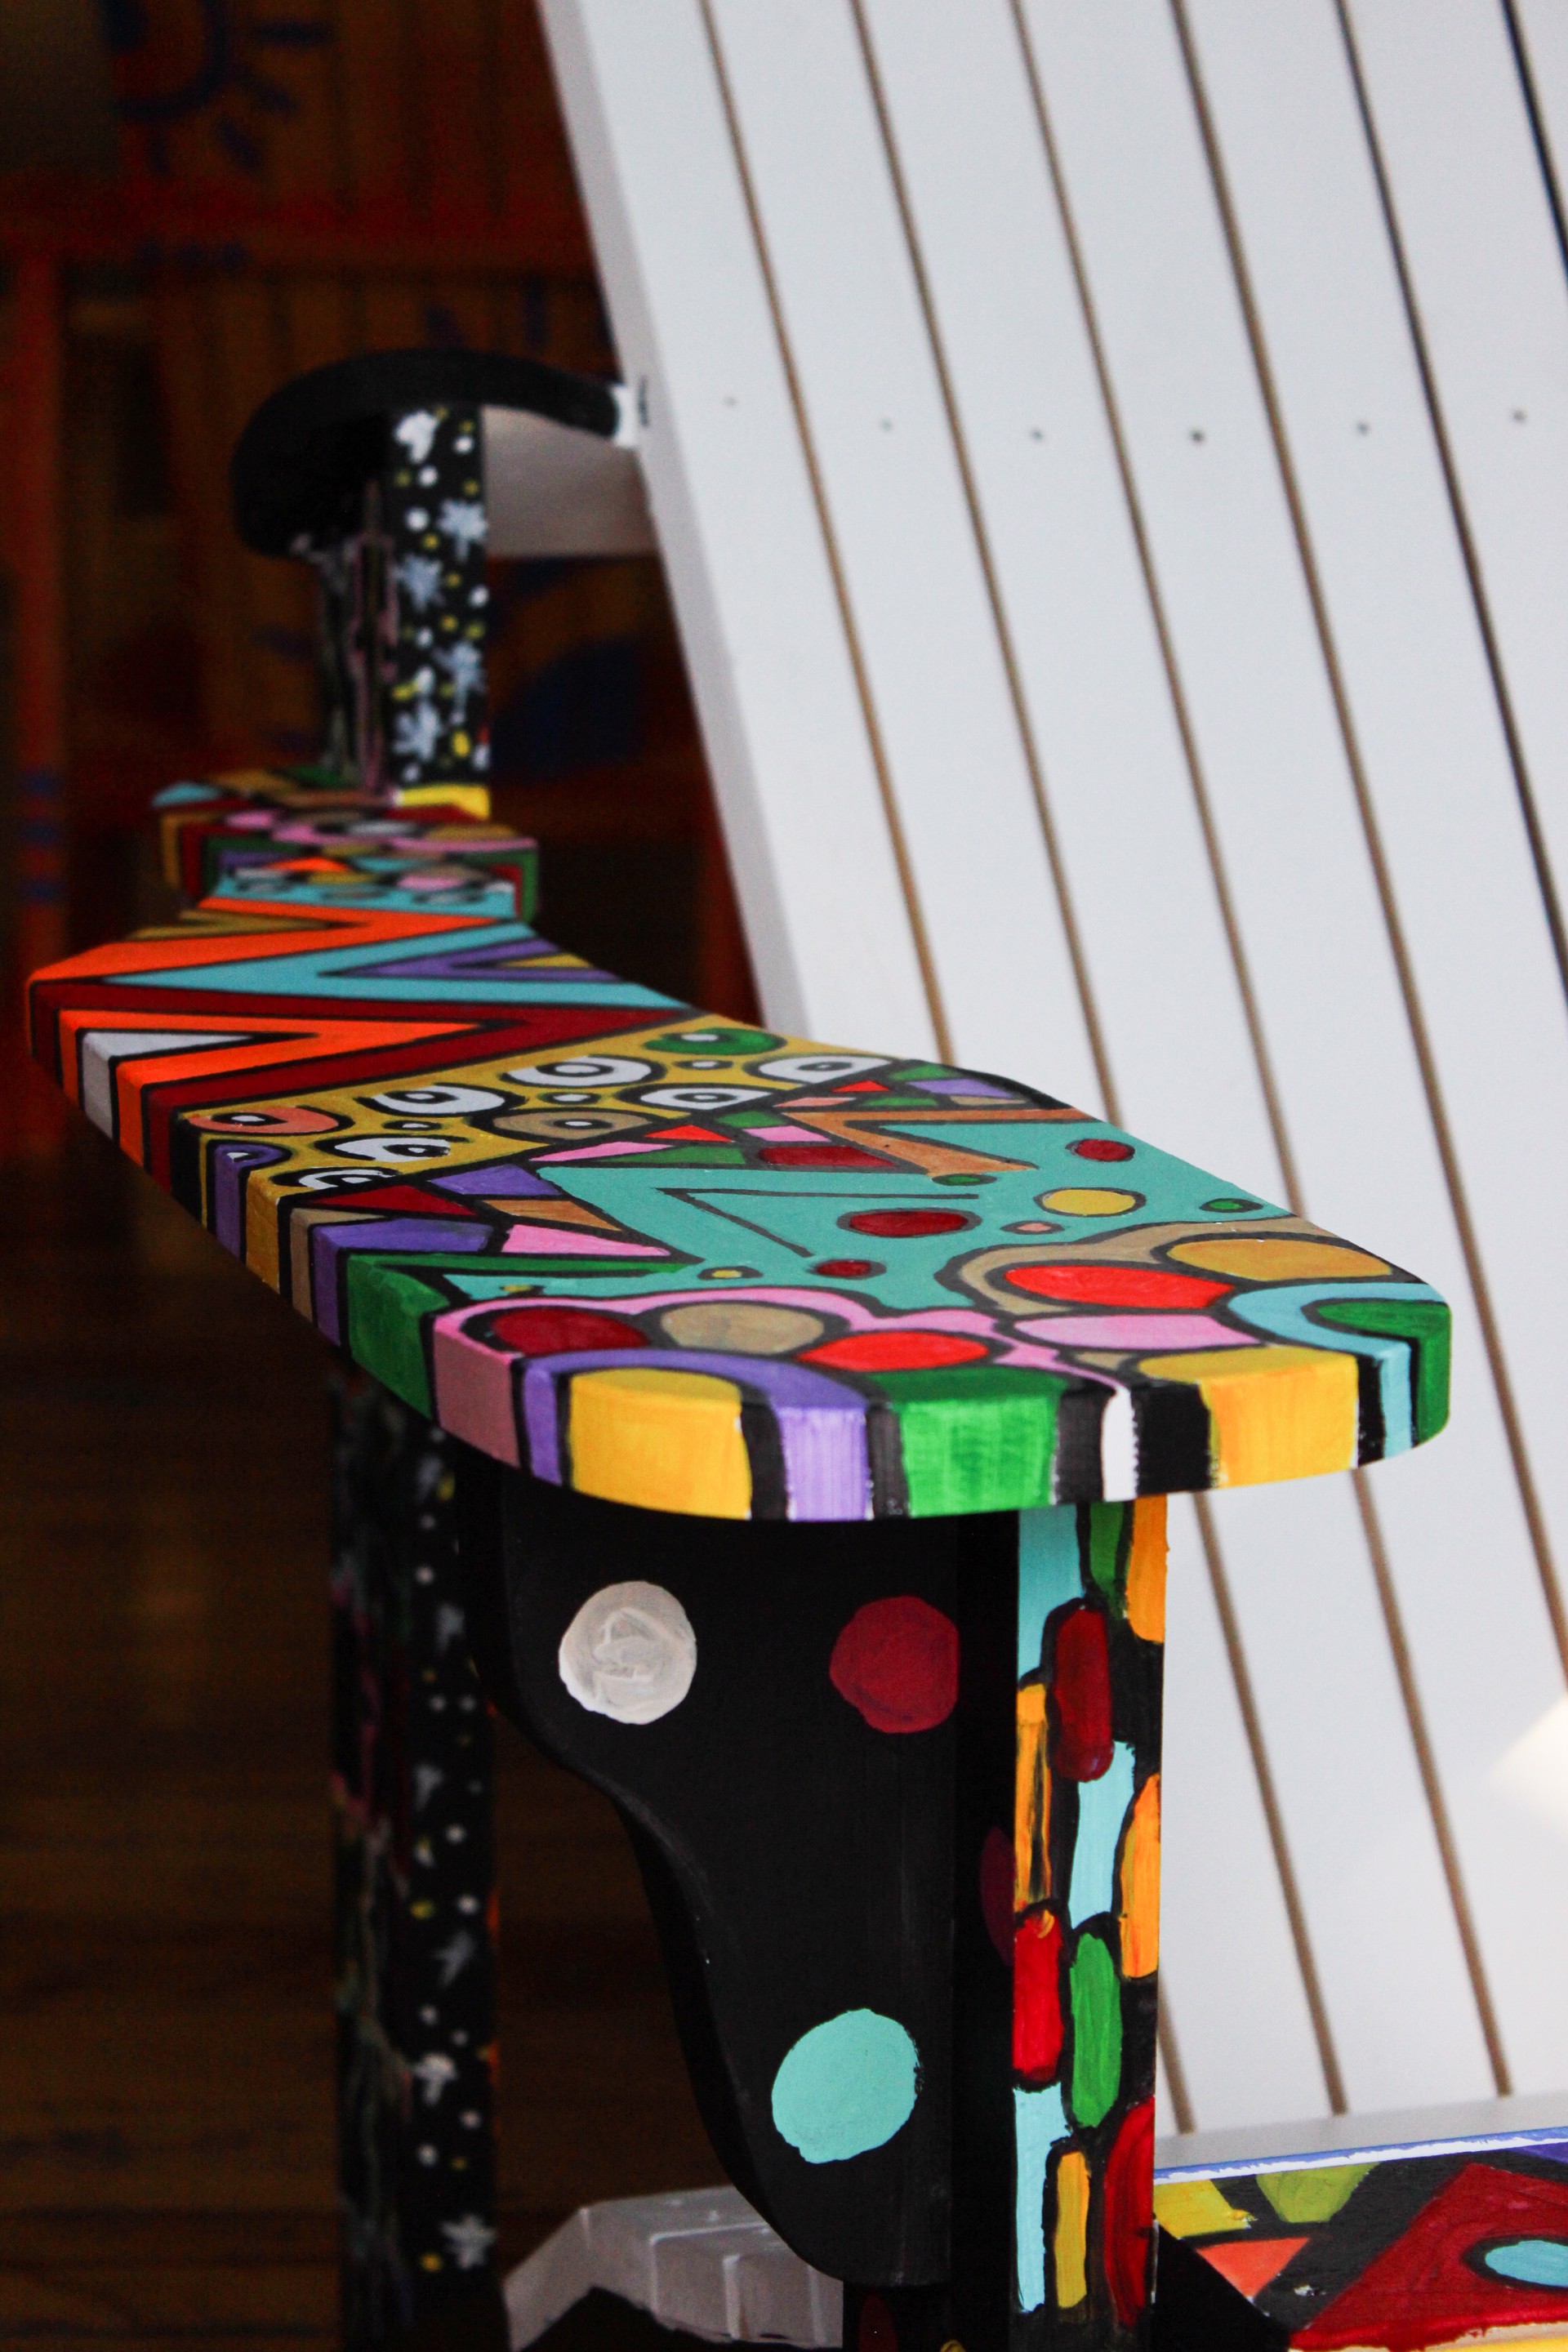 Hand-Painted Adirondack Chair with geometric patterns by Pinky